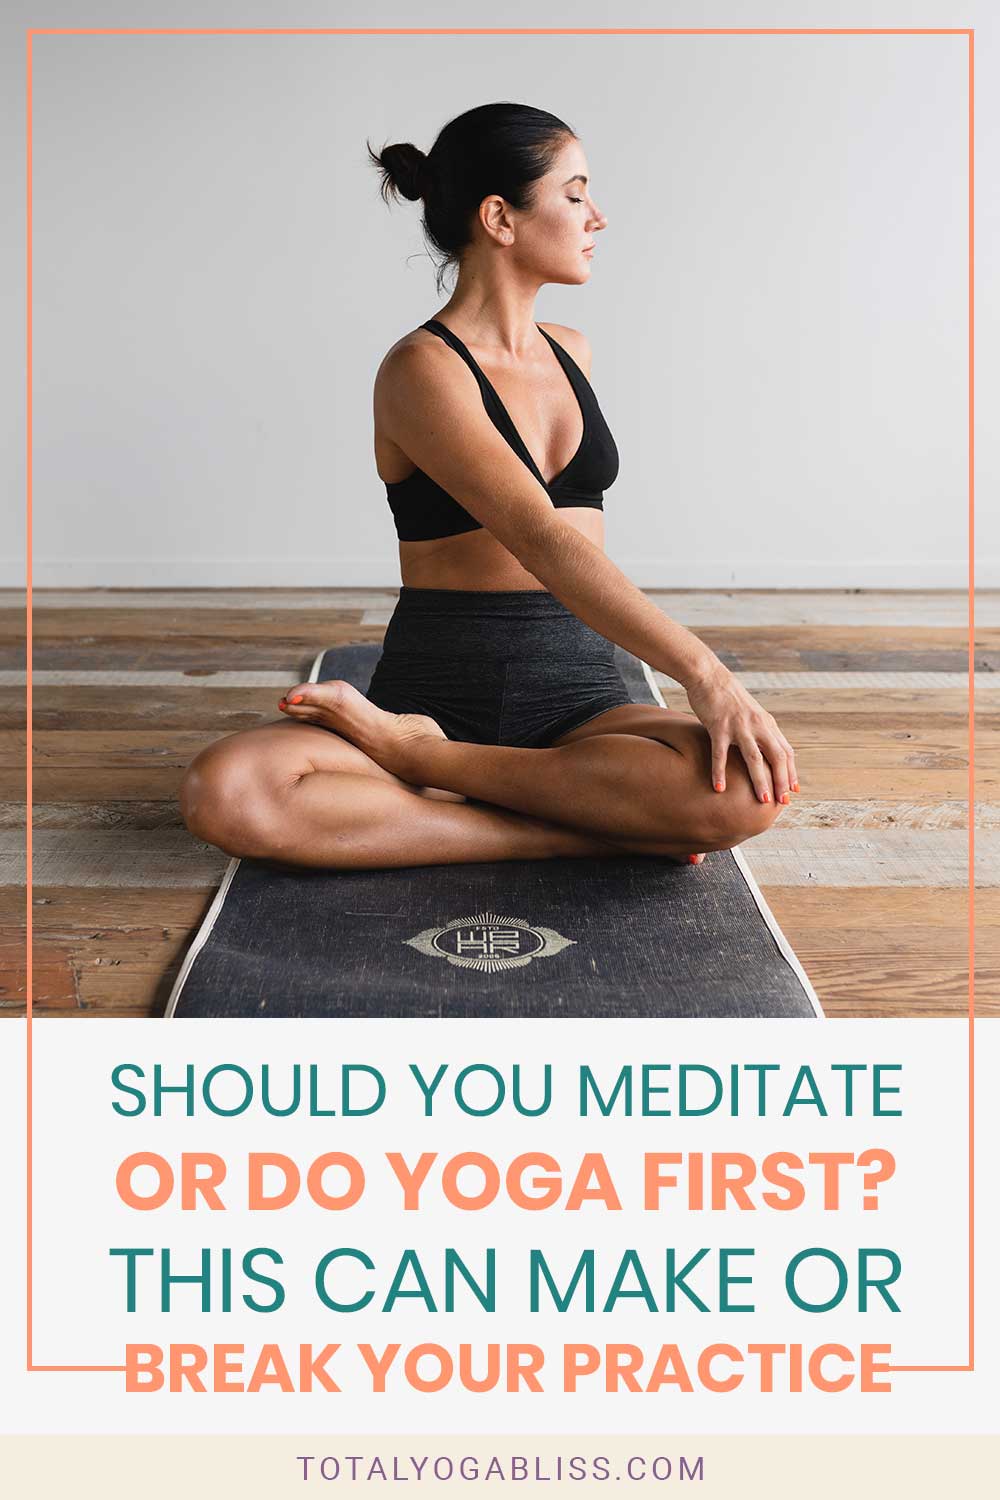 Woman doing yoga on a black yoga mat - Should You Meditate Or Do Yoga First?